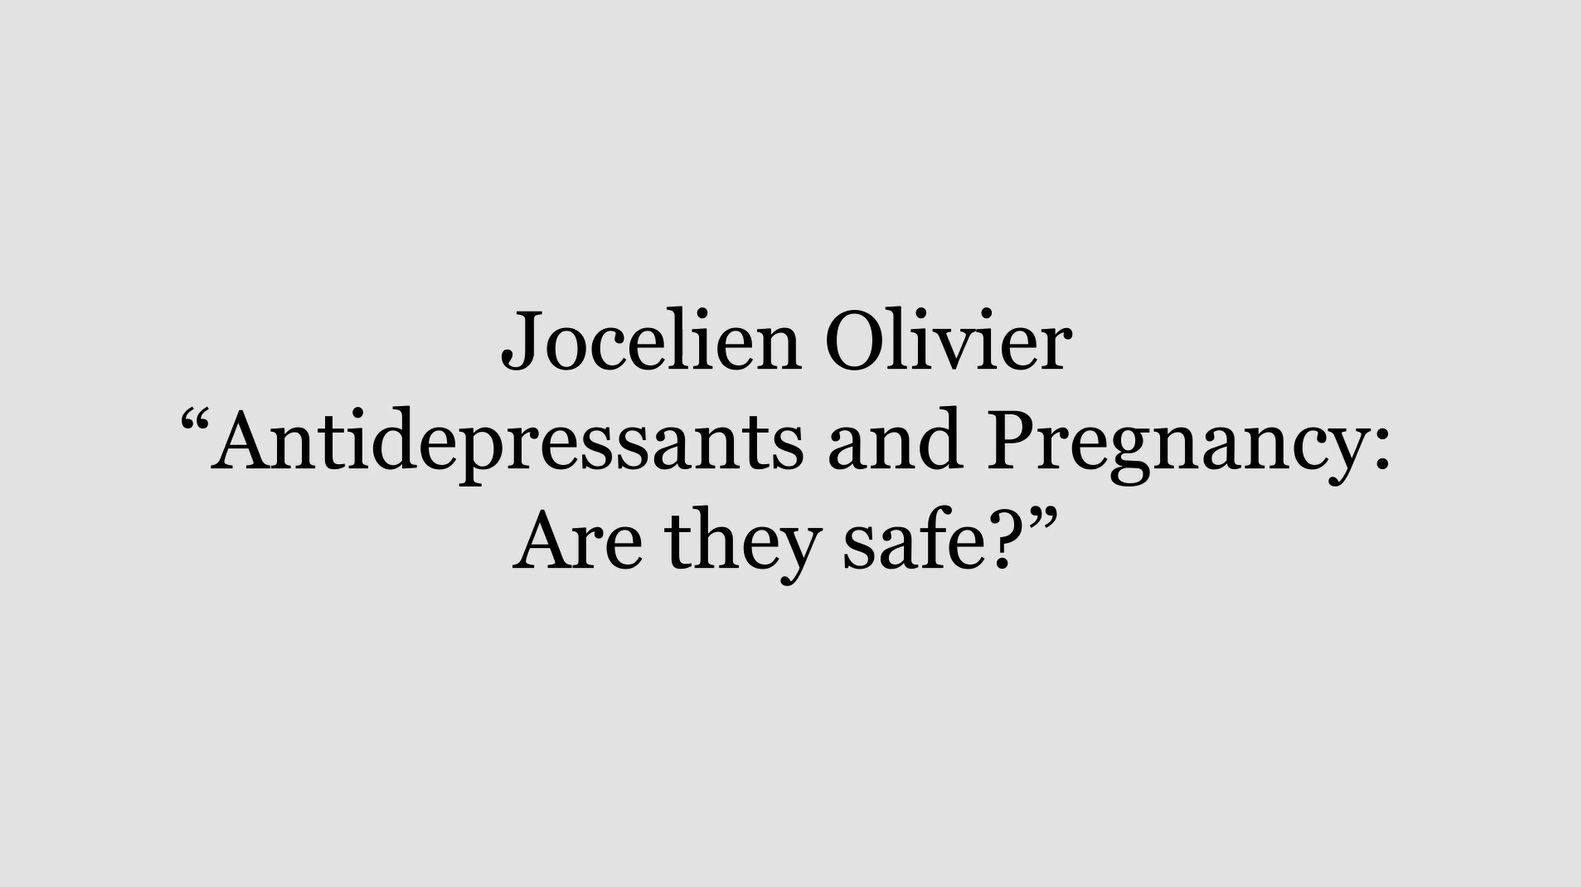 Antidepressants and Pregnancy: Are they safe? by Jocelien Olivier